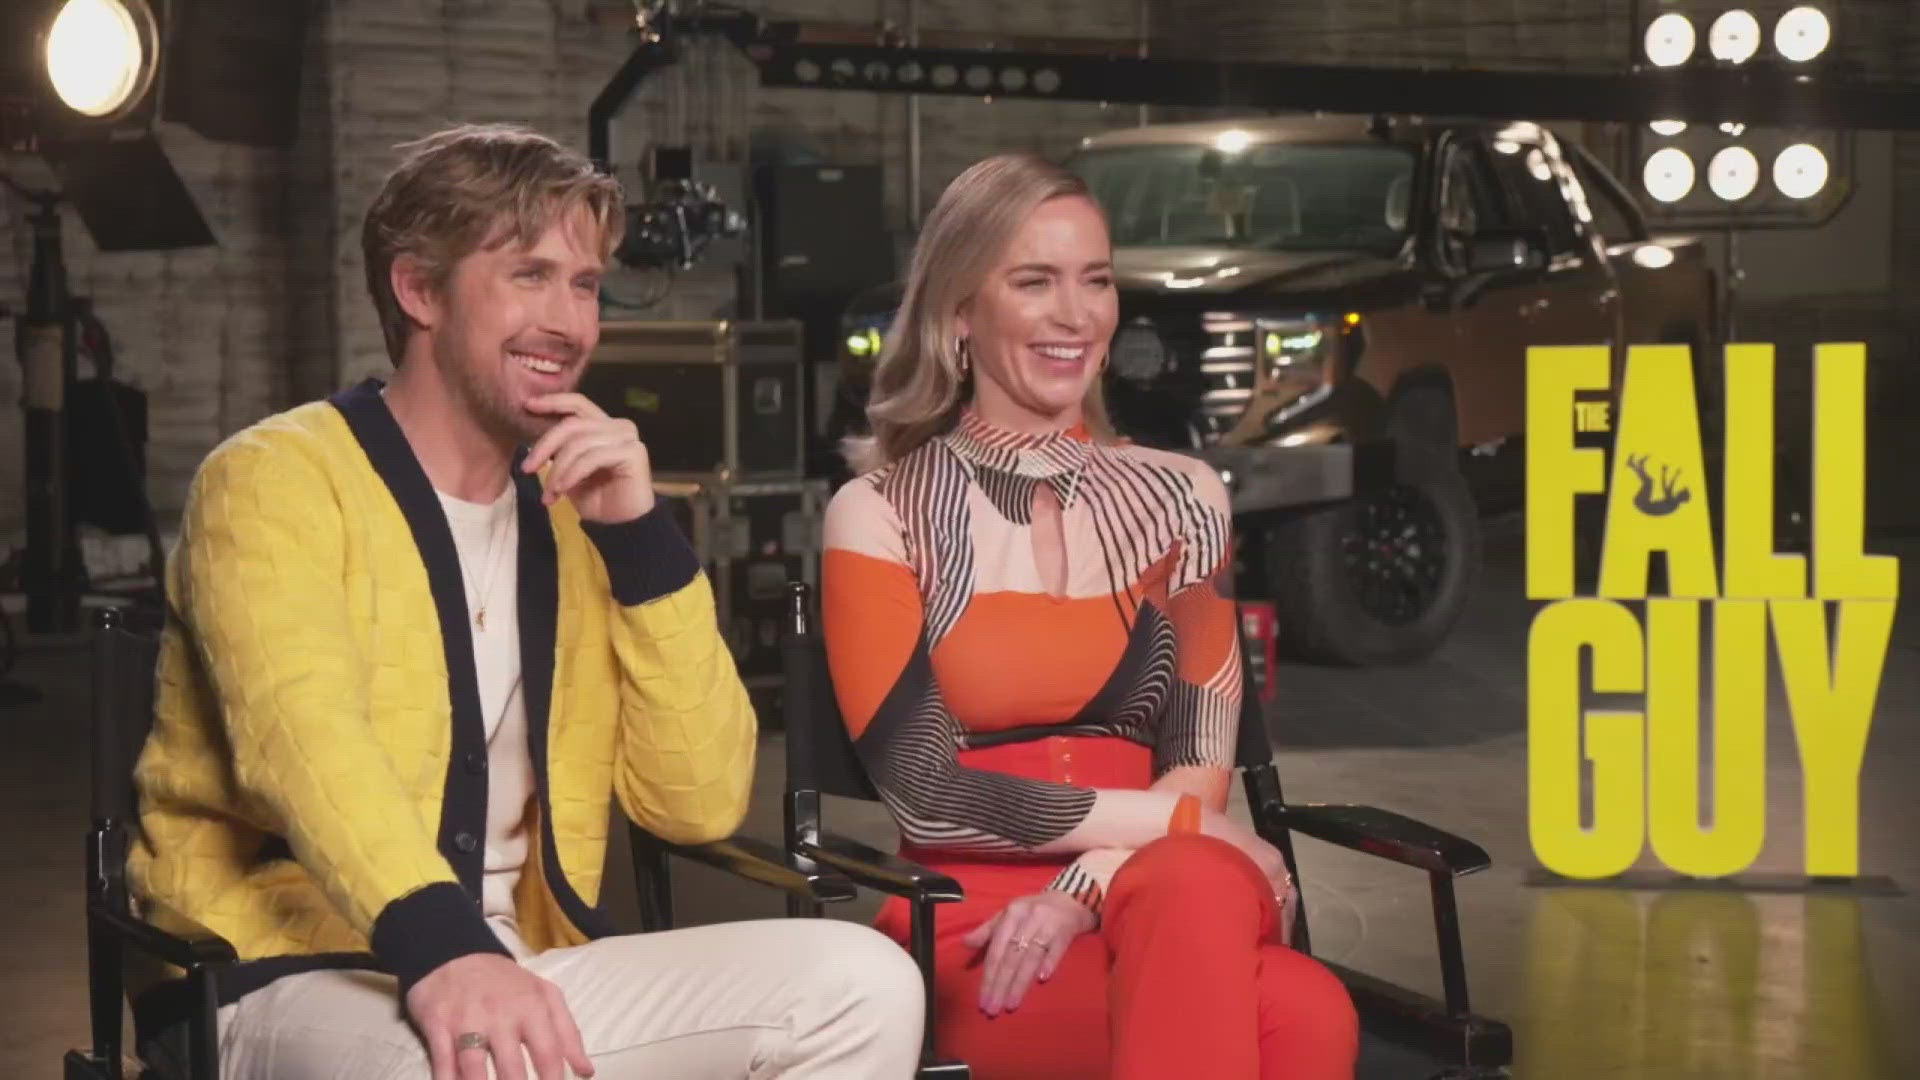 Ryan Gosling and Emily Blunt talk stunts in "The Fall Guy."